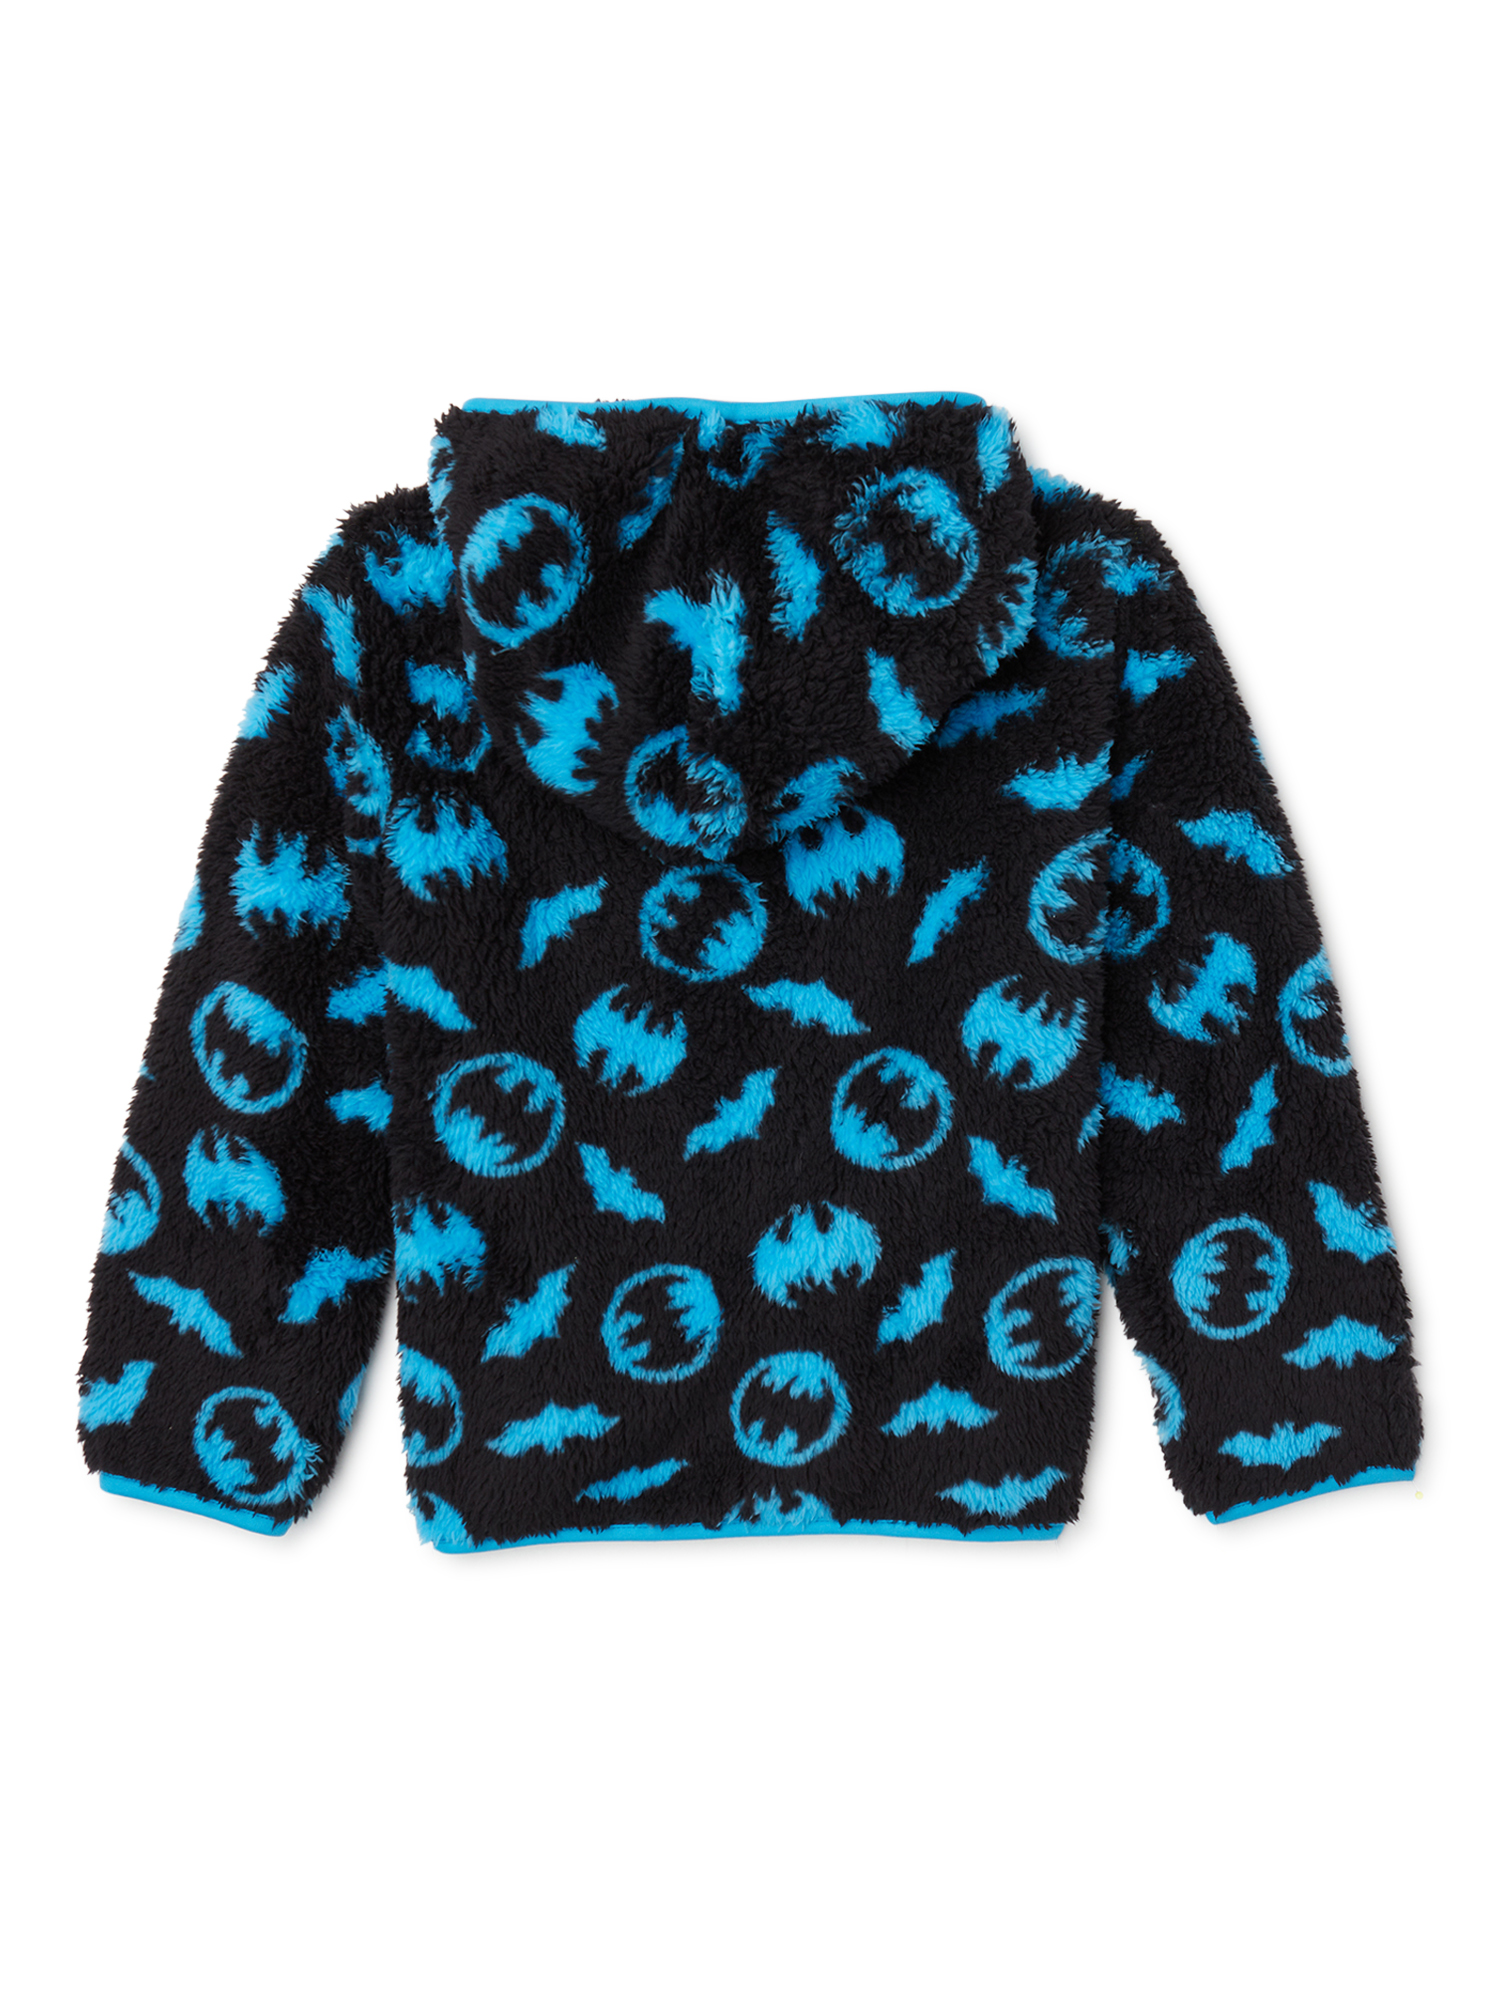 Batman Baby and Toddler Boys Faux Sherpa Quarter Zip Fleece Hoodie, Sizes 12M-5T - image 2 of 3